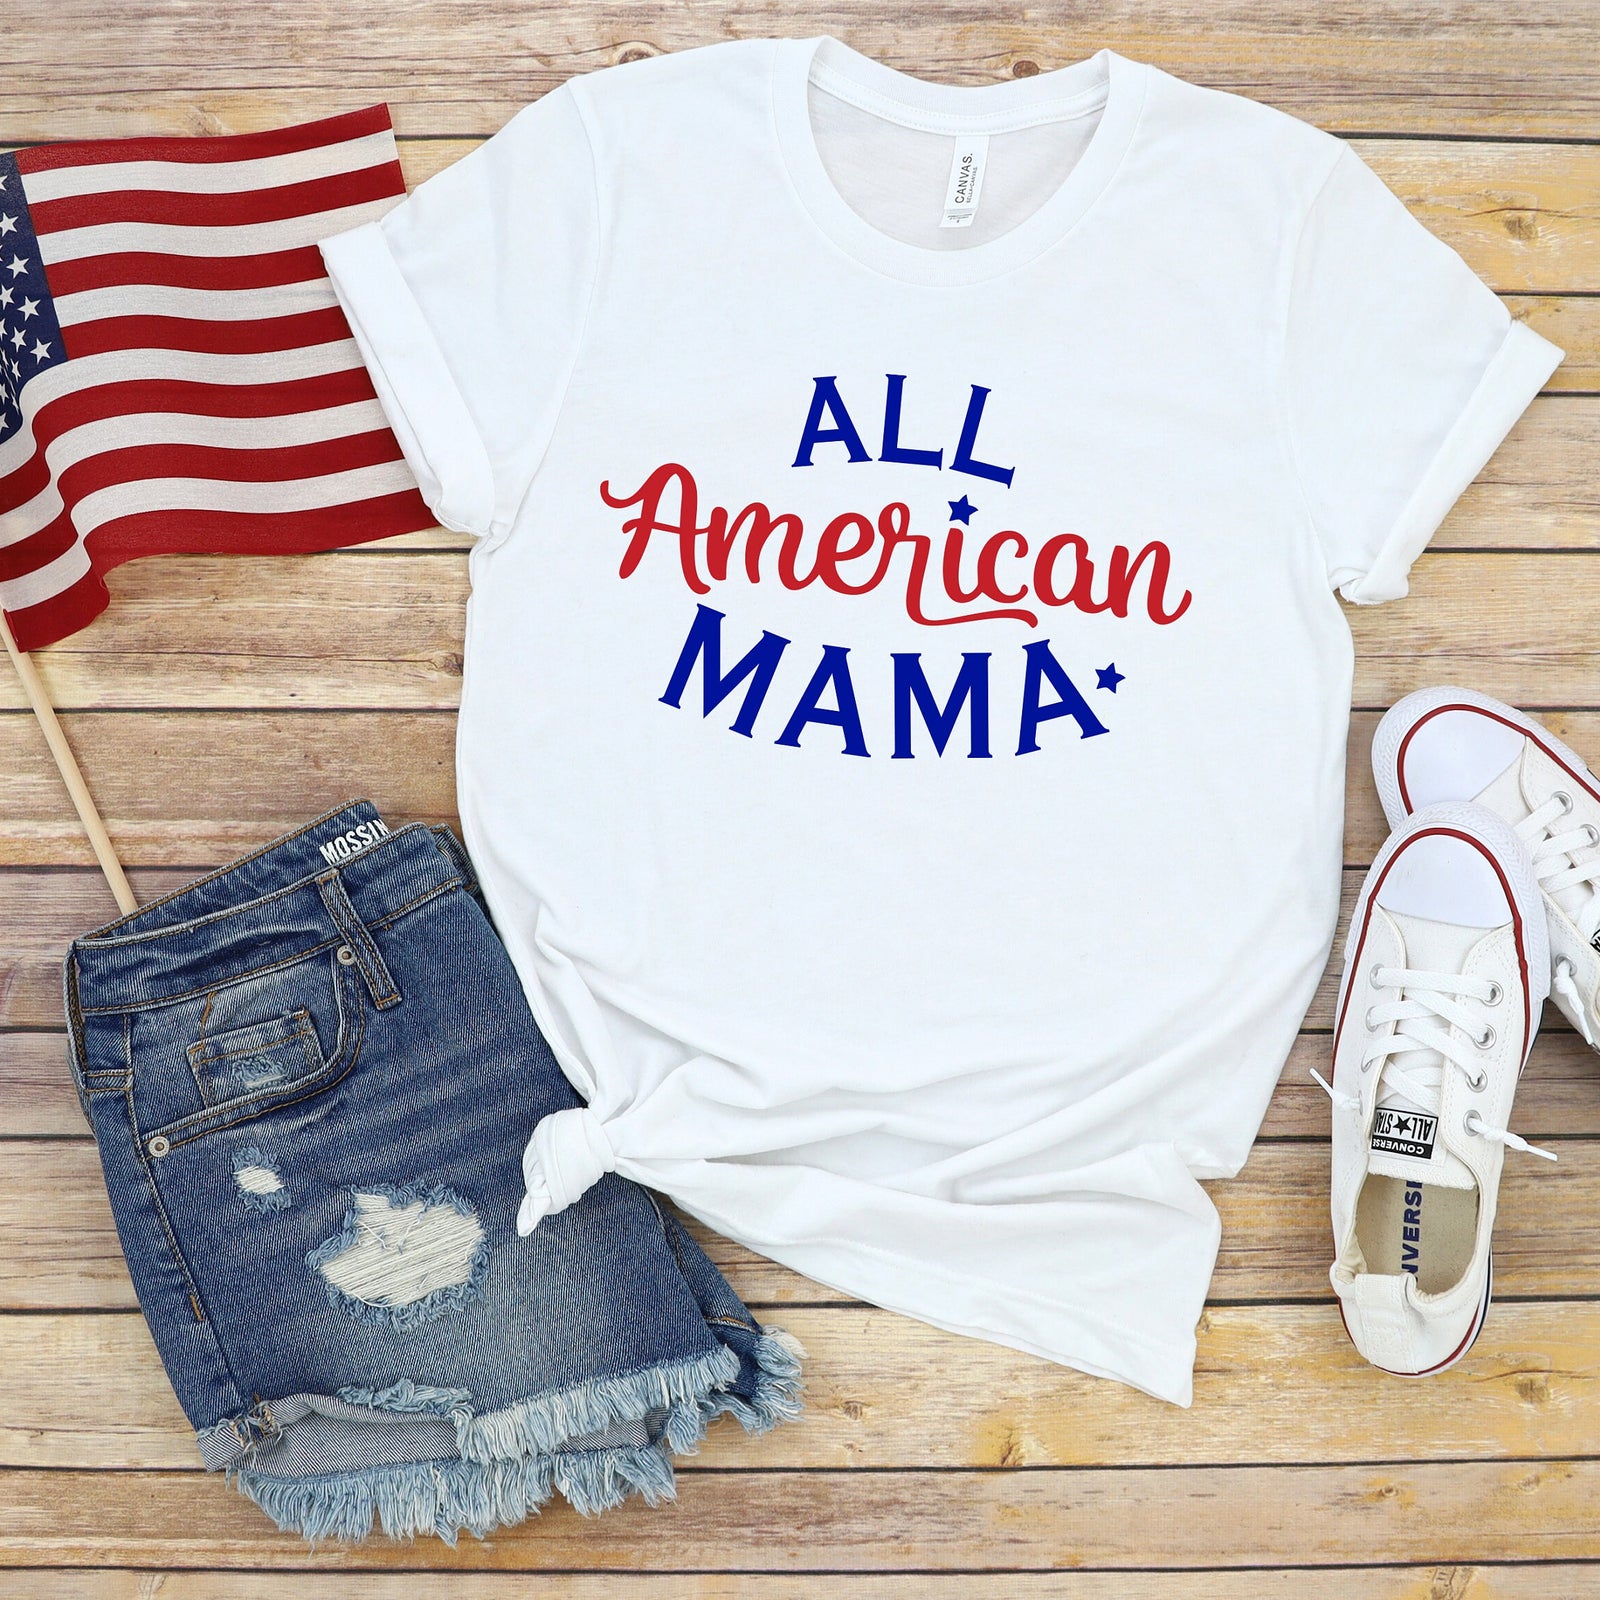 All American Mama- Fourth of July Adult T Shirt - Independence Day - Memorial - Red White and Blue